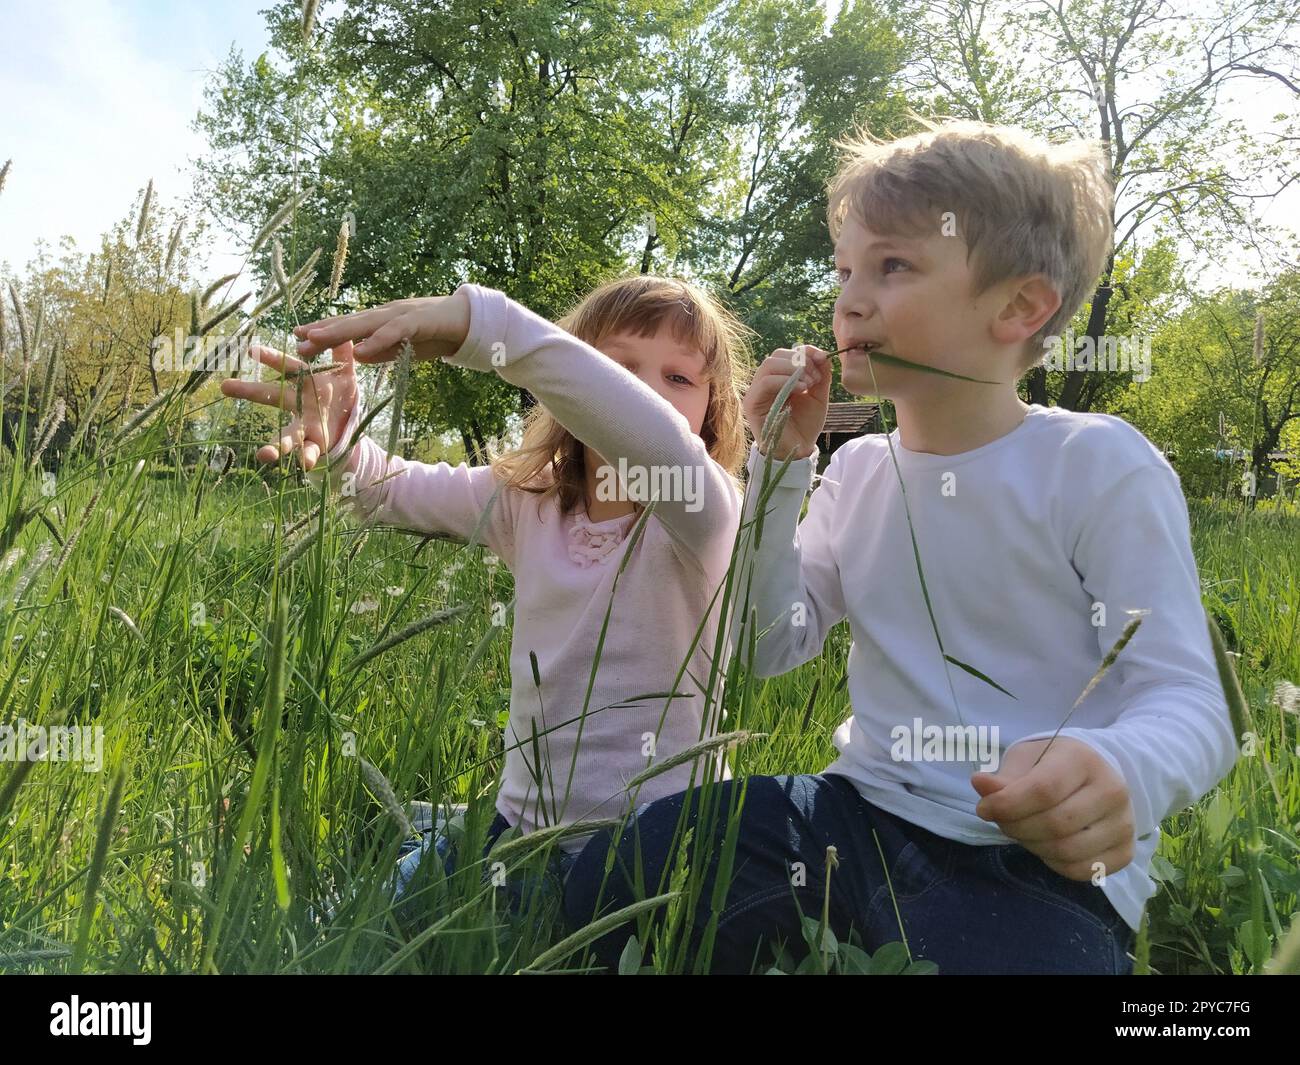 Children play in the grass, collect plants and flowers, taste the grass, and indulge. Lyovochka and a boy, brother and sister, have fun. Family concept. Allergy to flowering plants Stock Photo